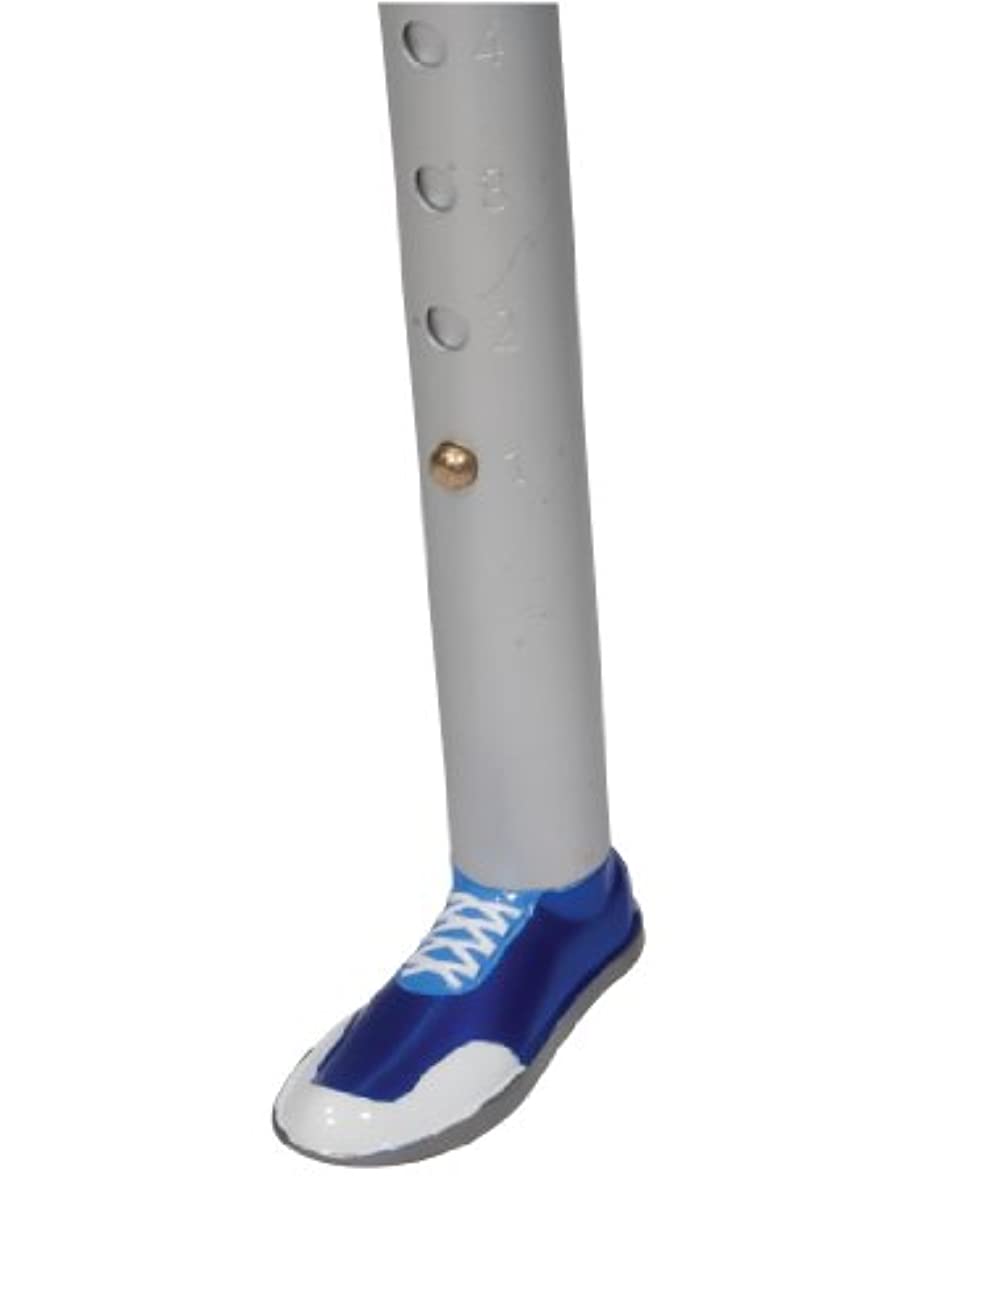 Pair of Universal Sneaker Walker Glides by Drive Medical - image 1 of 4